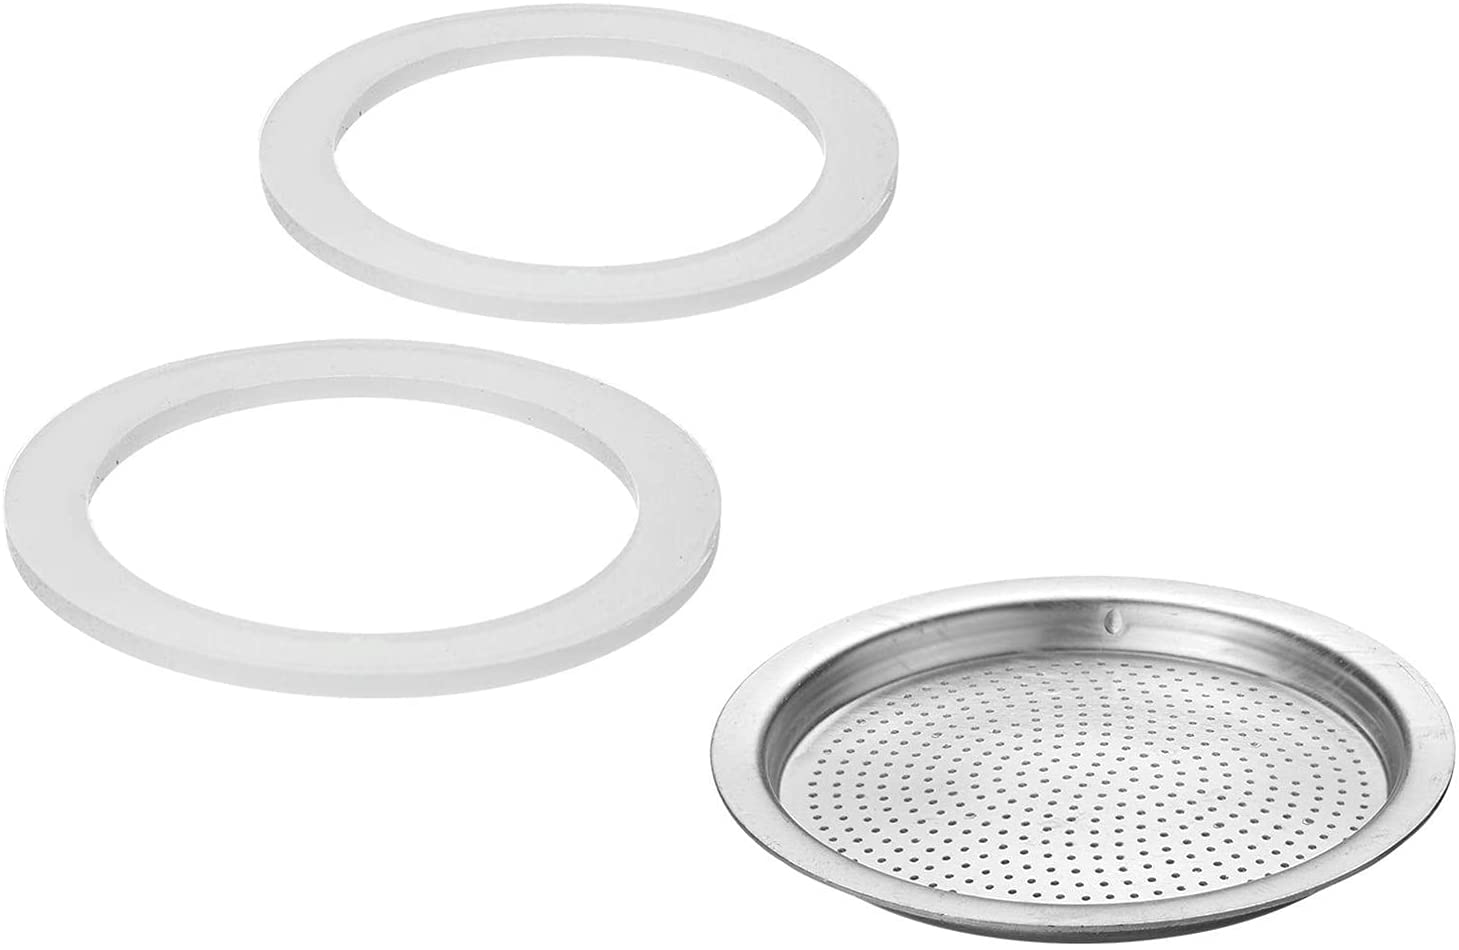 Westmark 2 Replacement Silicone Sealing Rings + 1 Replacement Filter Plate for Espresso Maker 24662260 (4 Cups) Brasilia Plus Silicone/Stainless Steel 2466228E